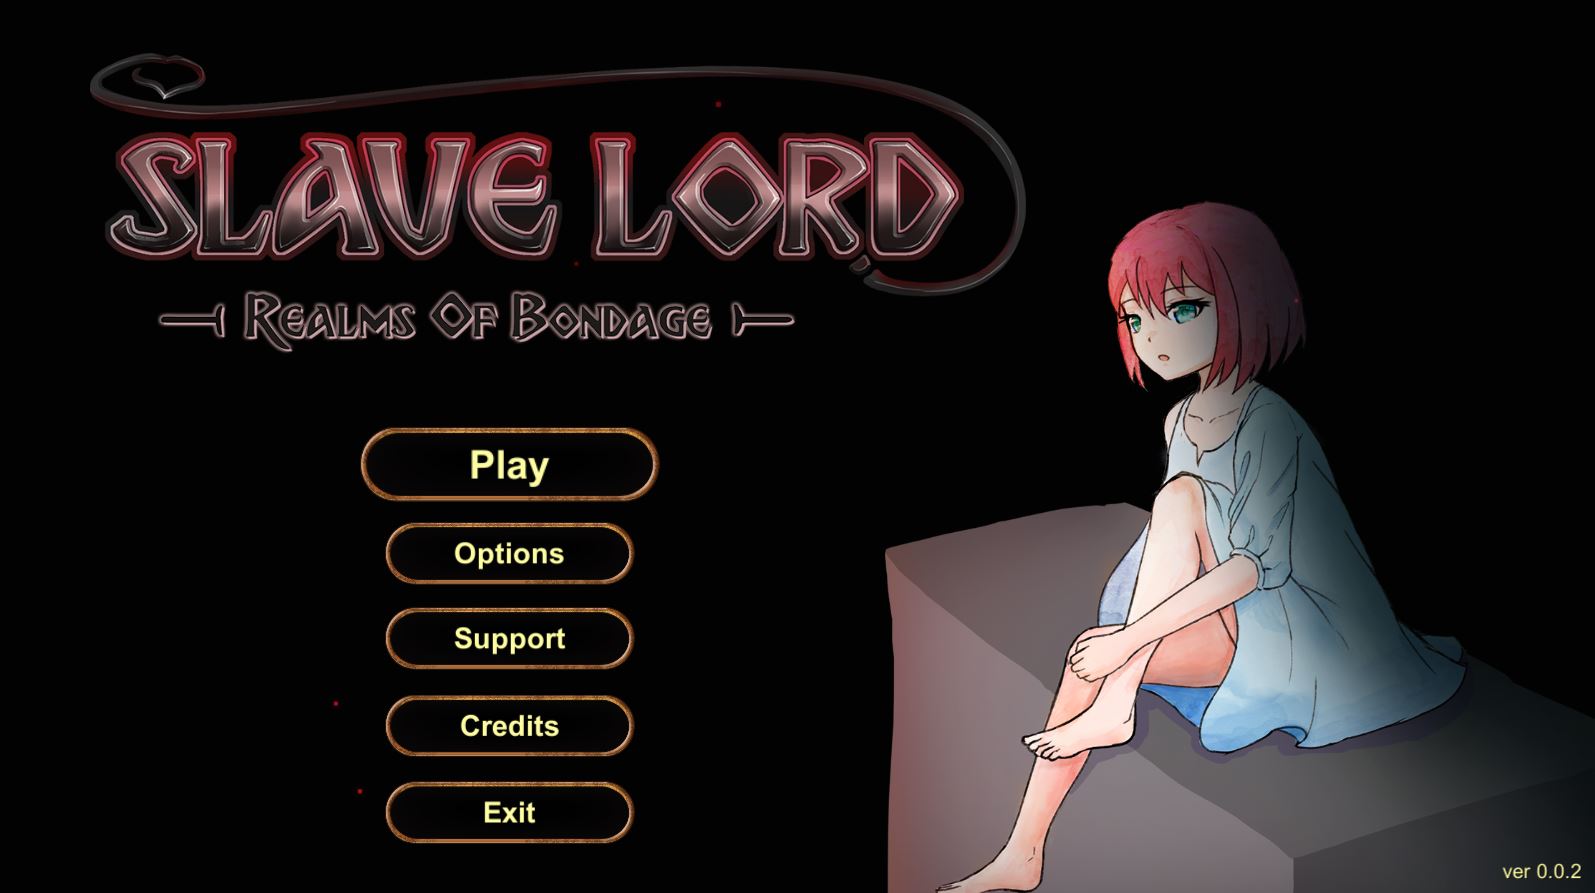 Cartoon Bondage Games - Unity] Slave Lord Realms of Bondage - v0.2.9 by Pink Tea Games 18+ Adult  xxx Porn Game Download